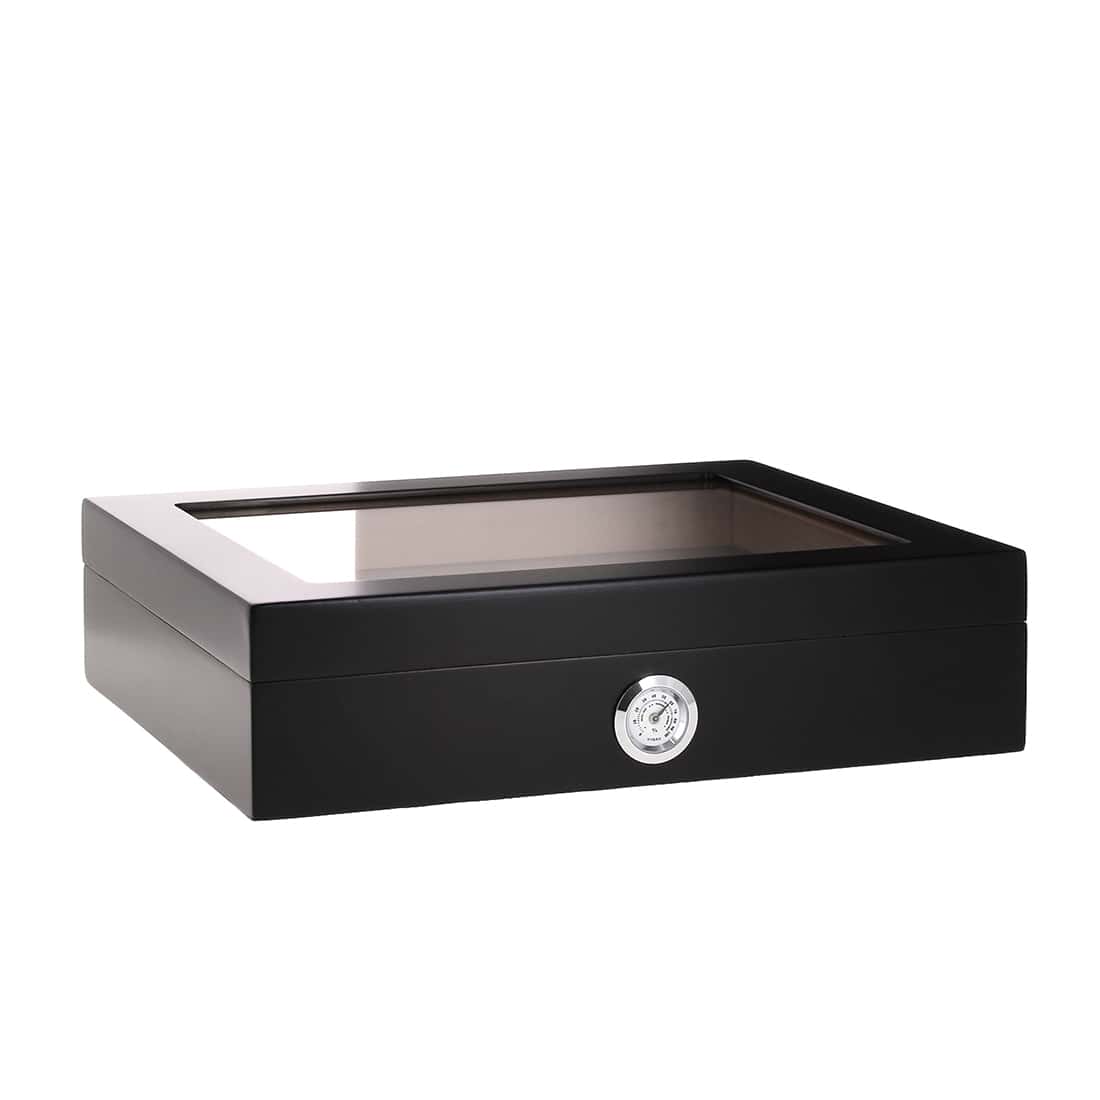 Humidificateur Cigare Rectangulaire